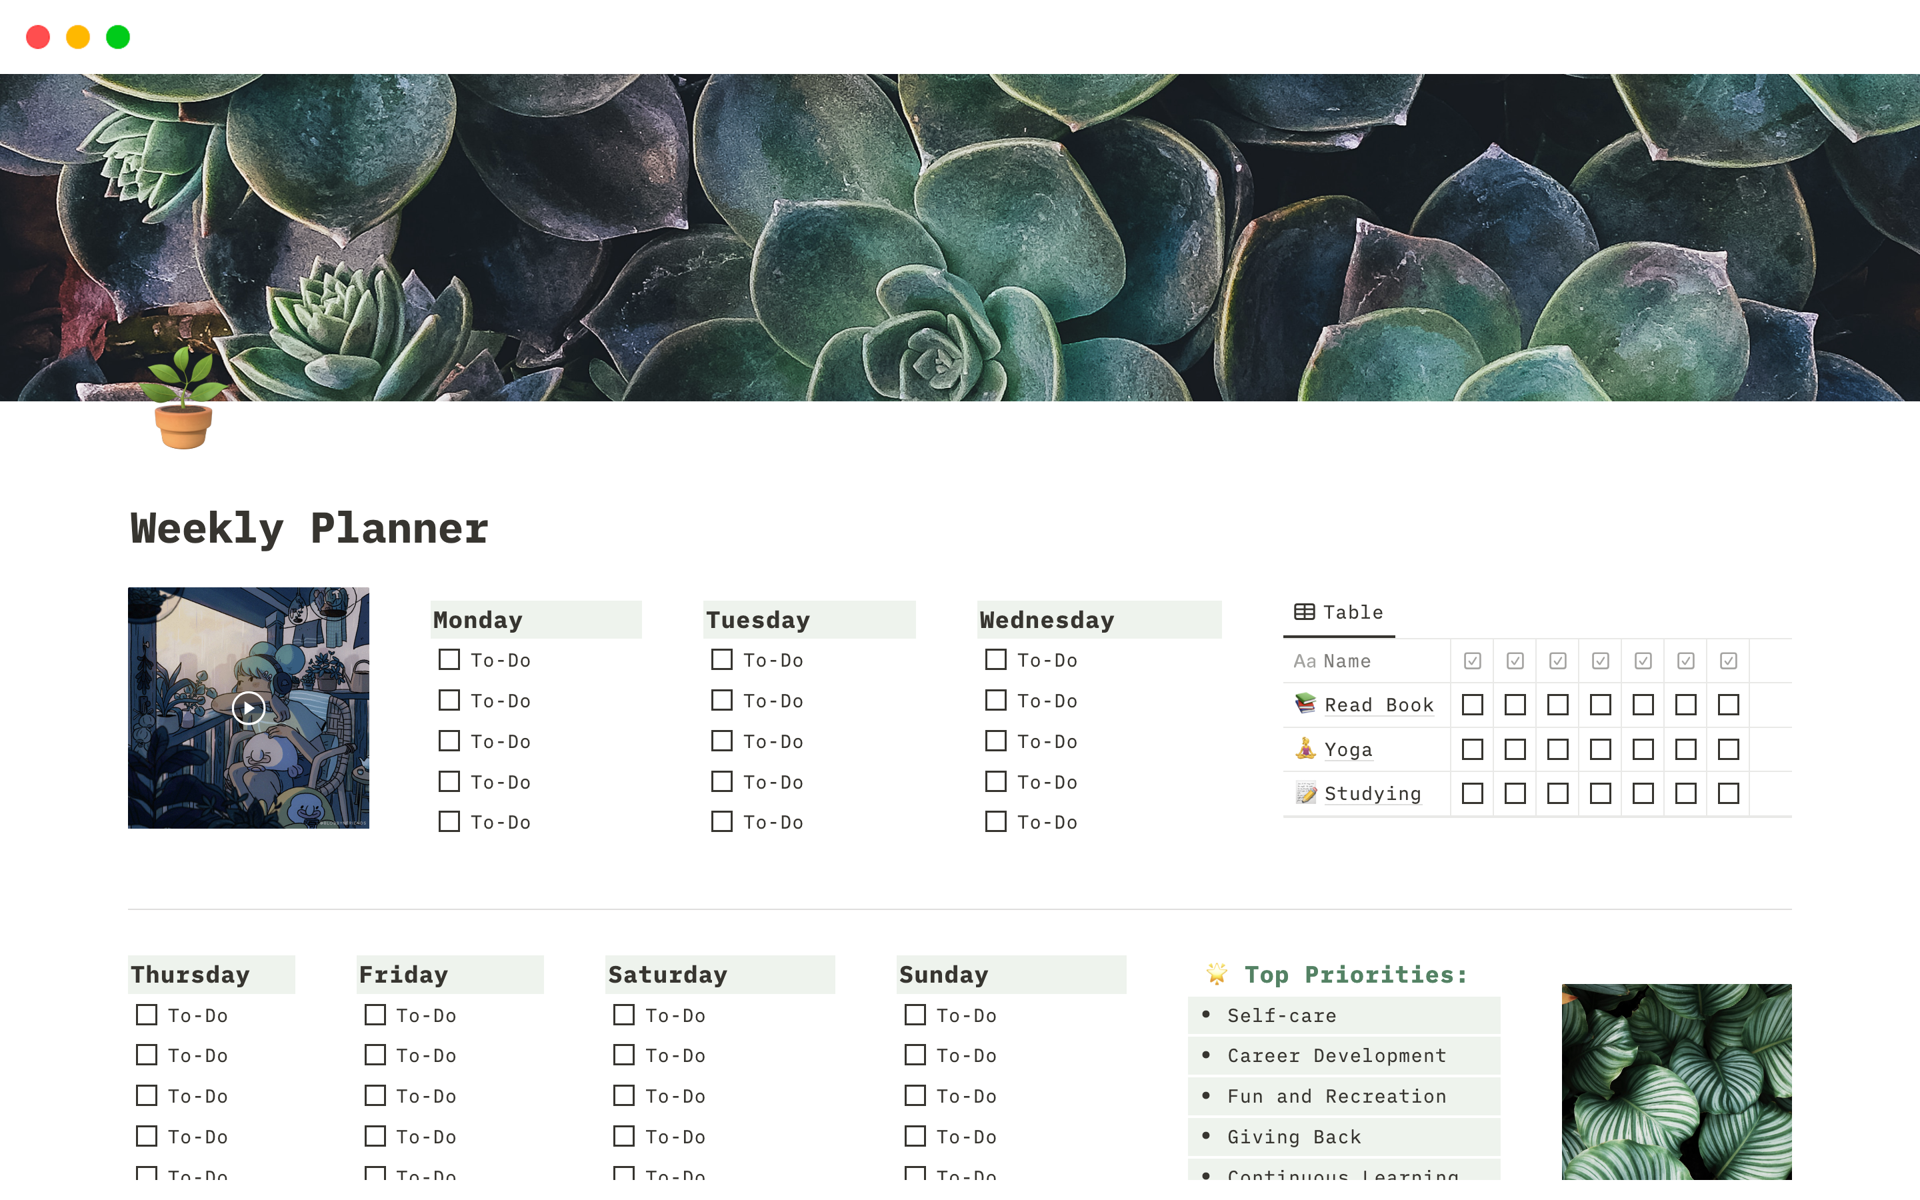 The weekly template provides a structured layout for planning tasks, events, and goals on a week-by-week basis, helping users stay organised and focused.